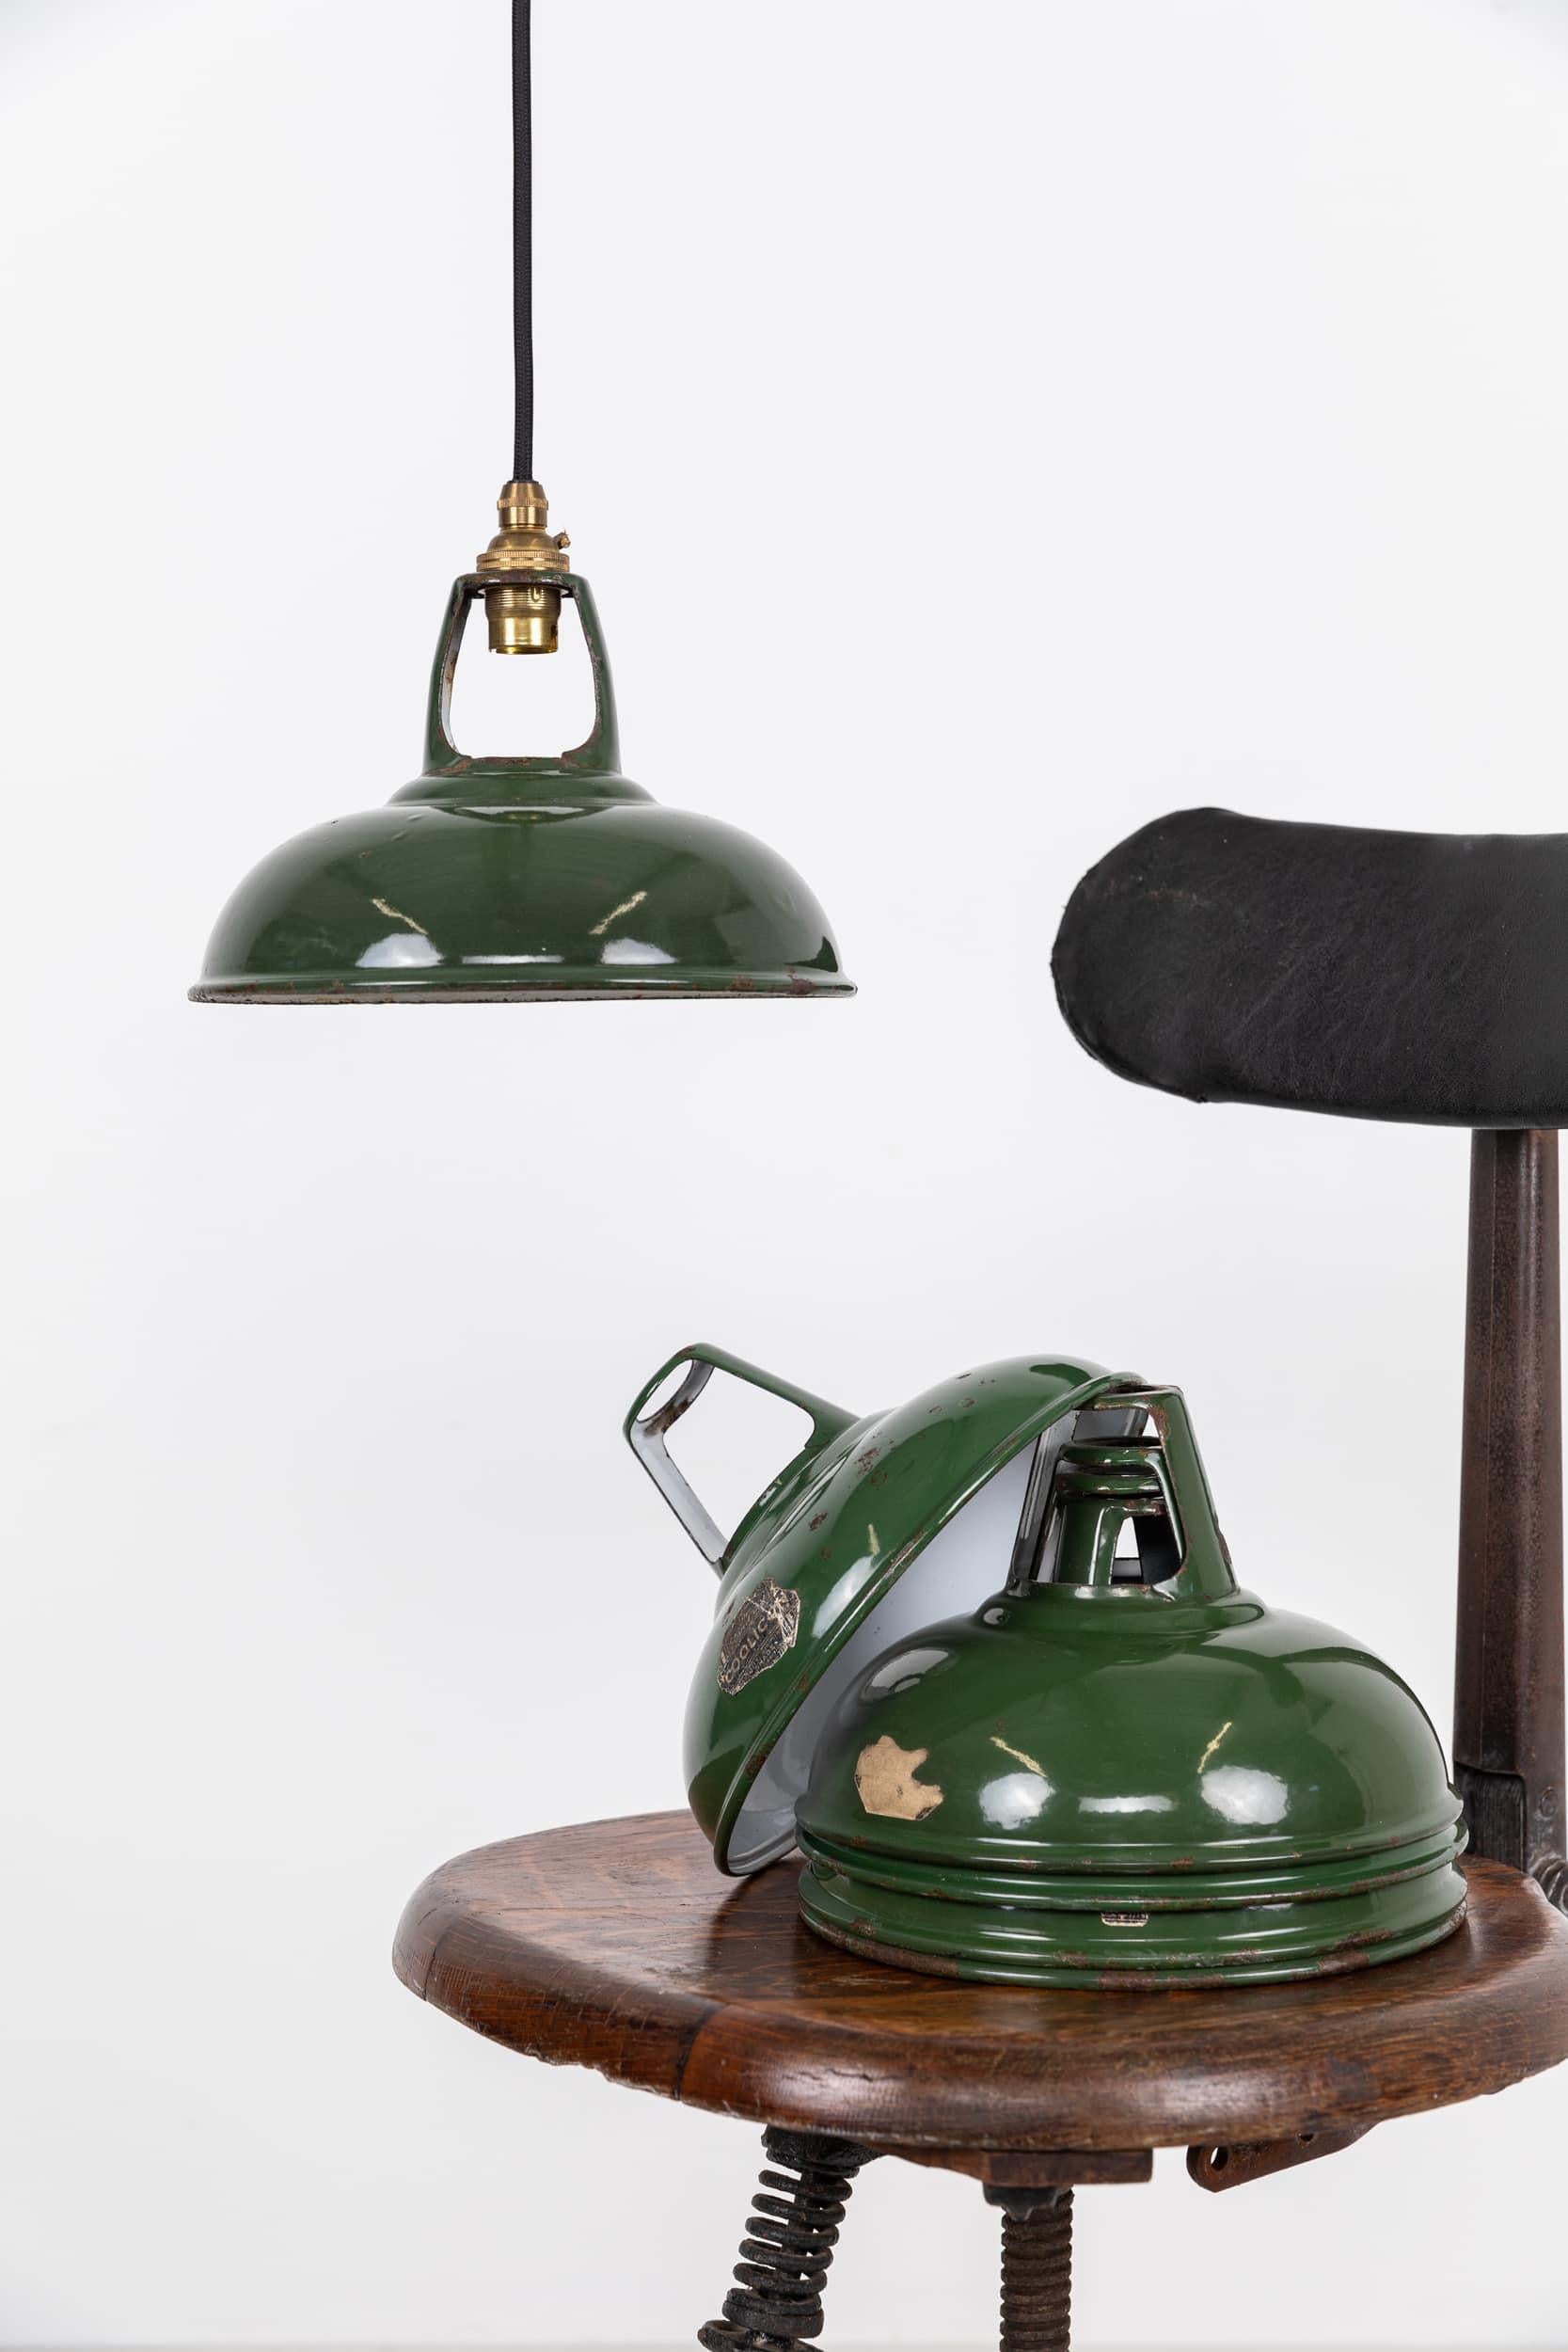 Diminutive vitreous enamel pendant lights by Coolicon. c.1930

In amazing original condition, with little wear to the enamel. Some shades retain their original paper label. Price is per lamp.

Resold by GEC as shown in an original catalogue from